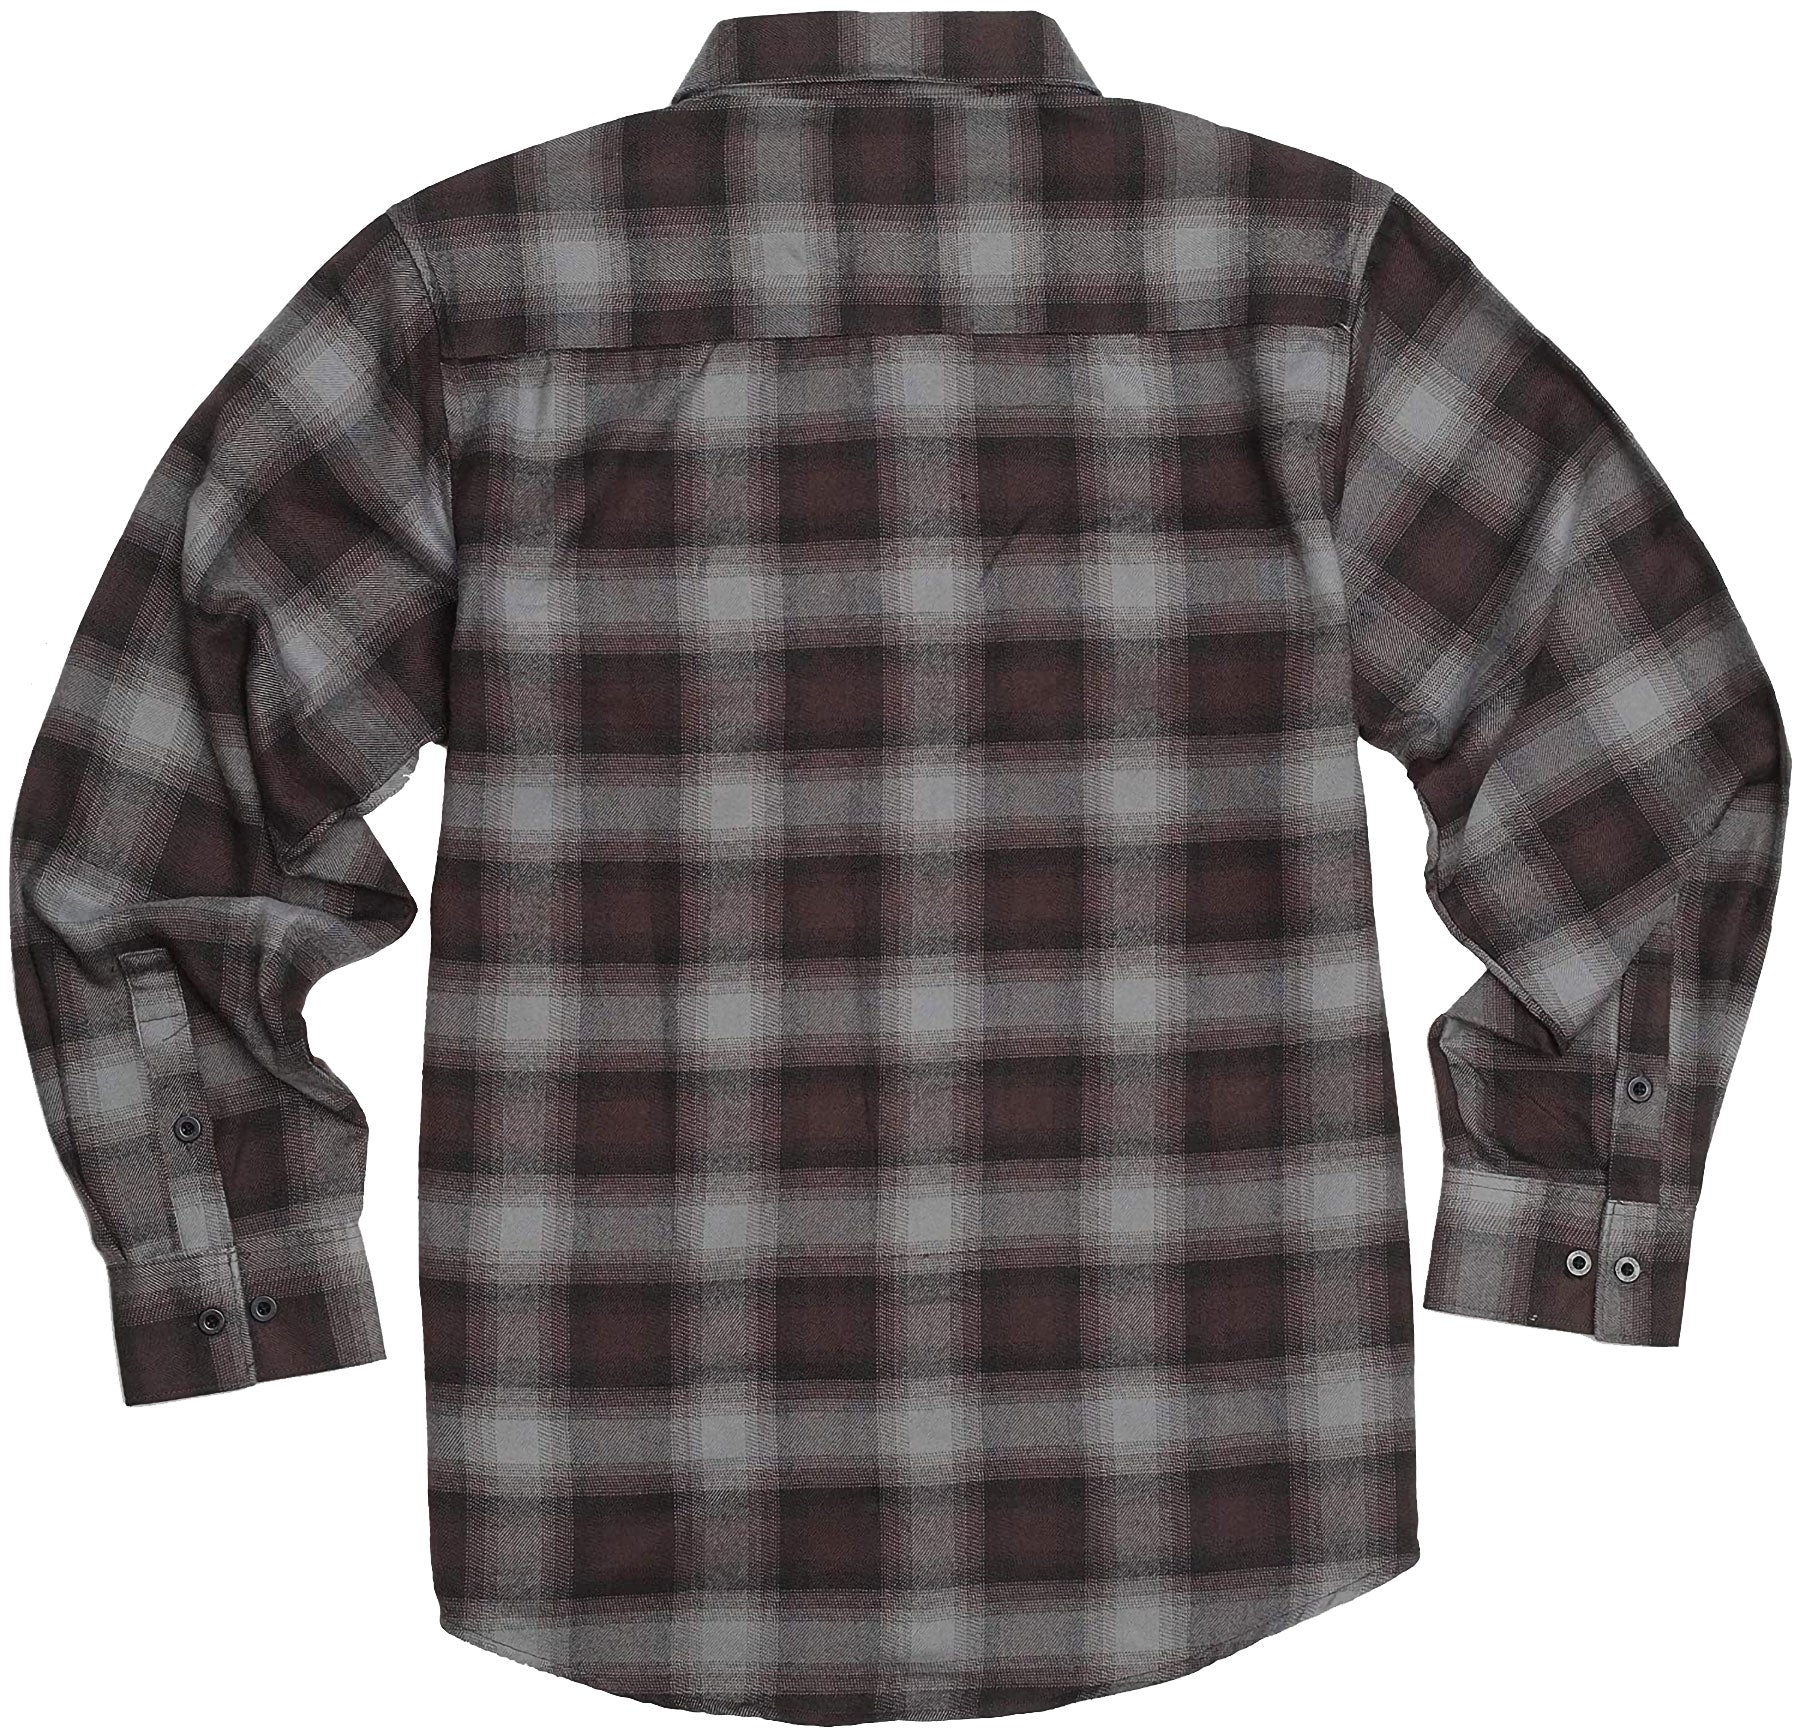 The Brown Flannel